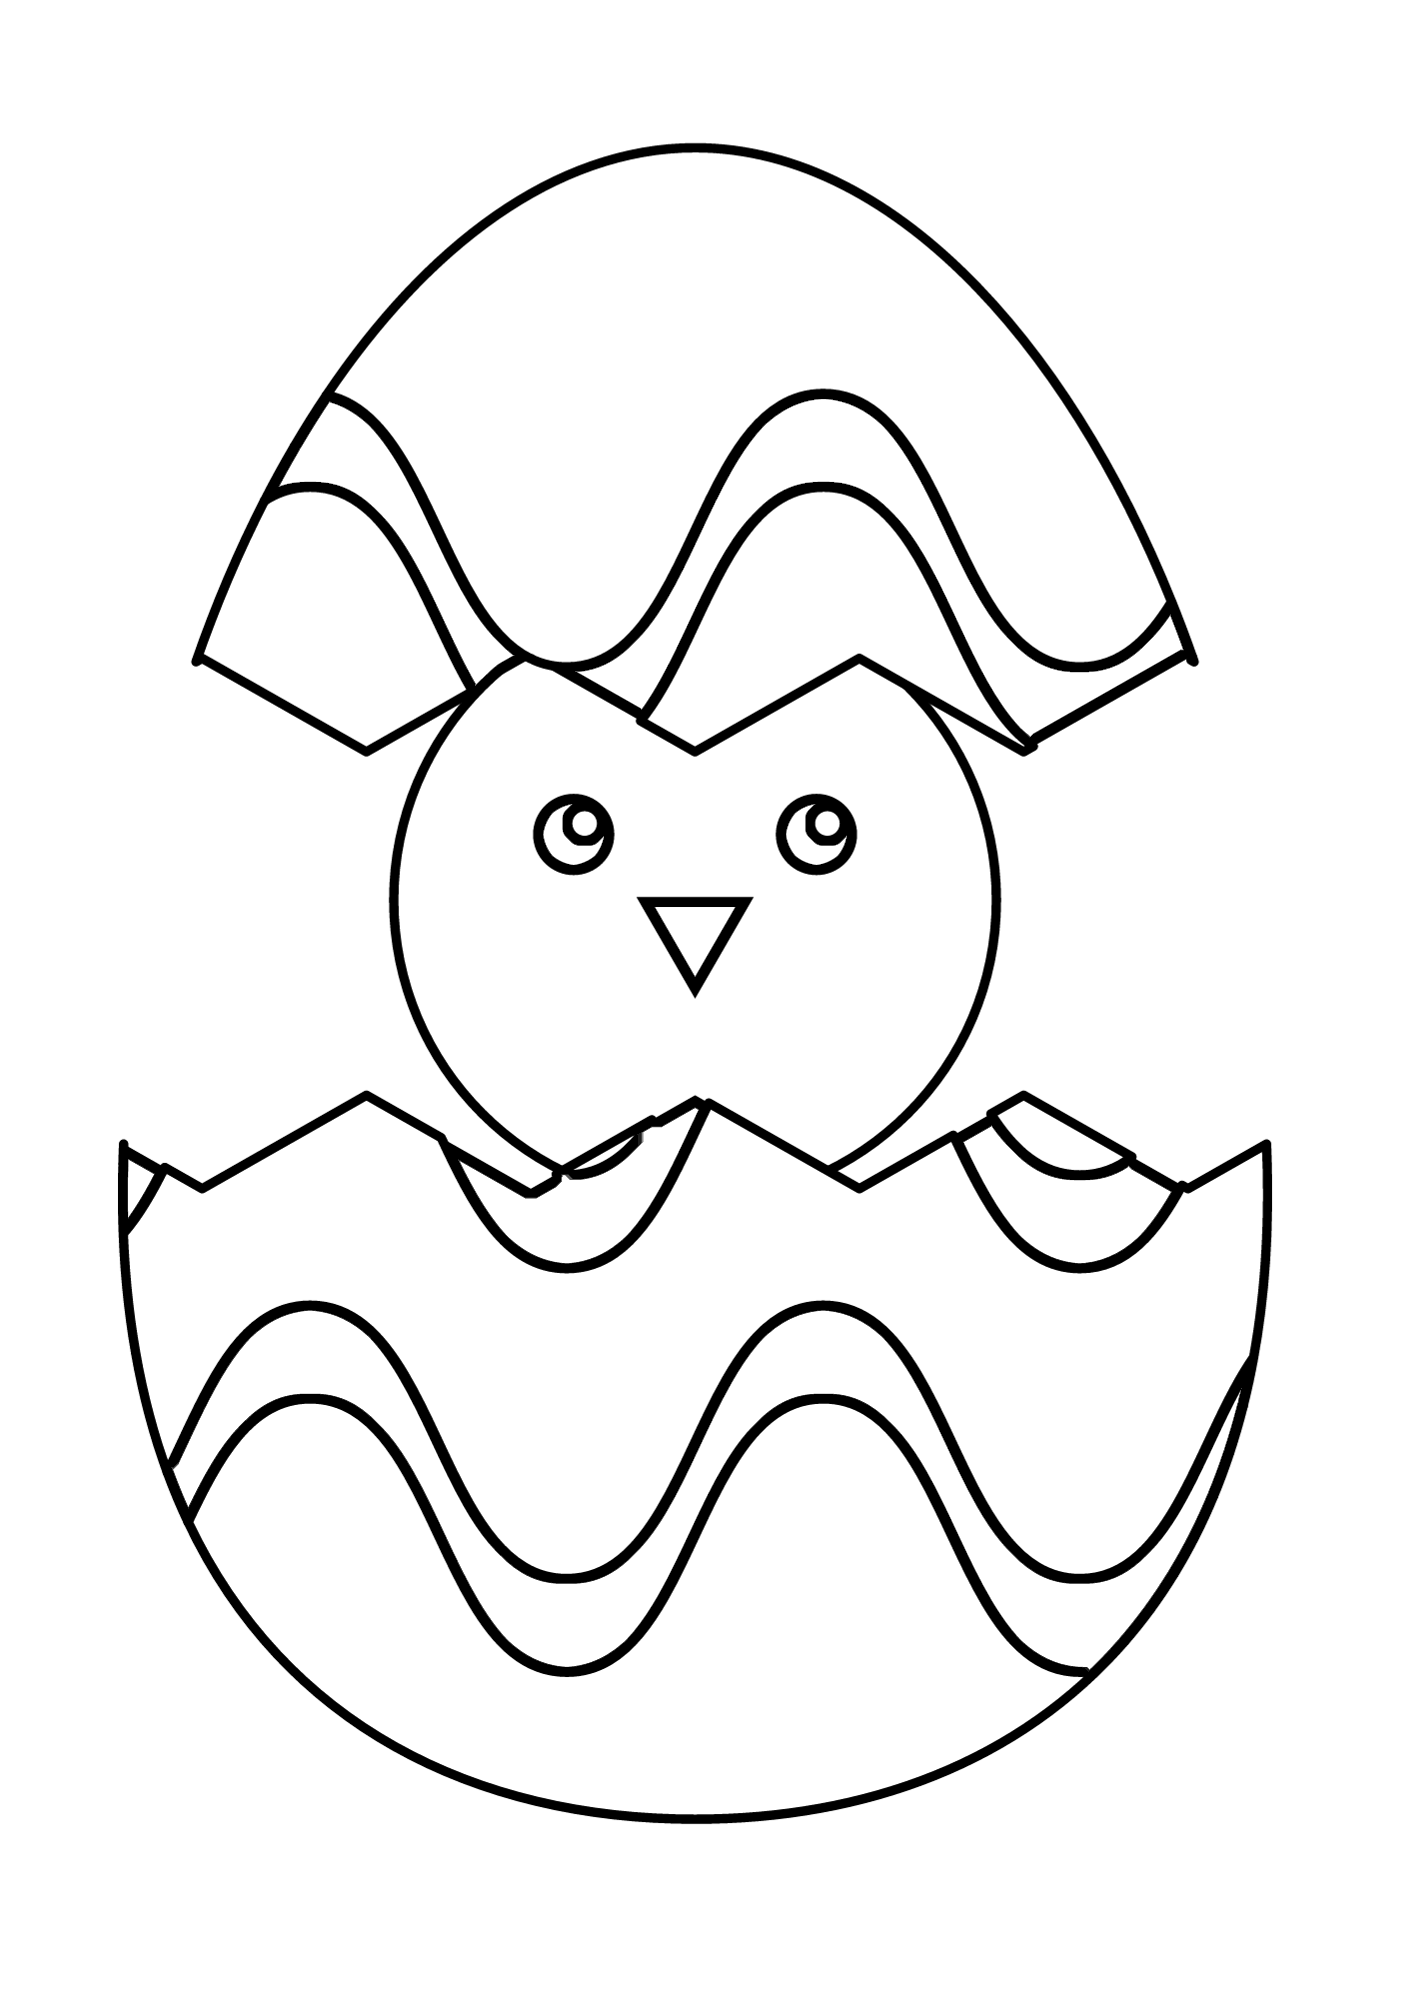 Easter Egg Chick Coloring Page